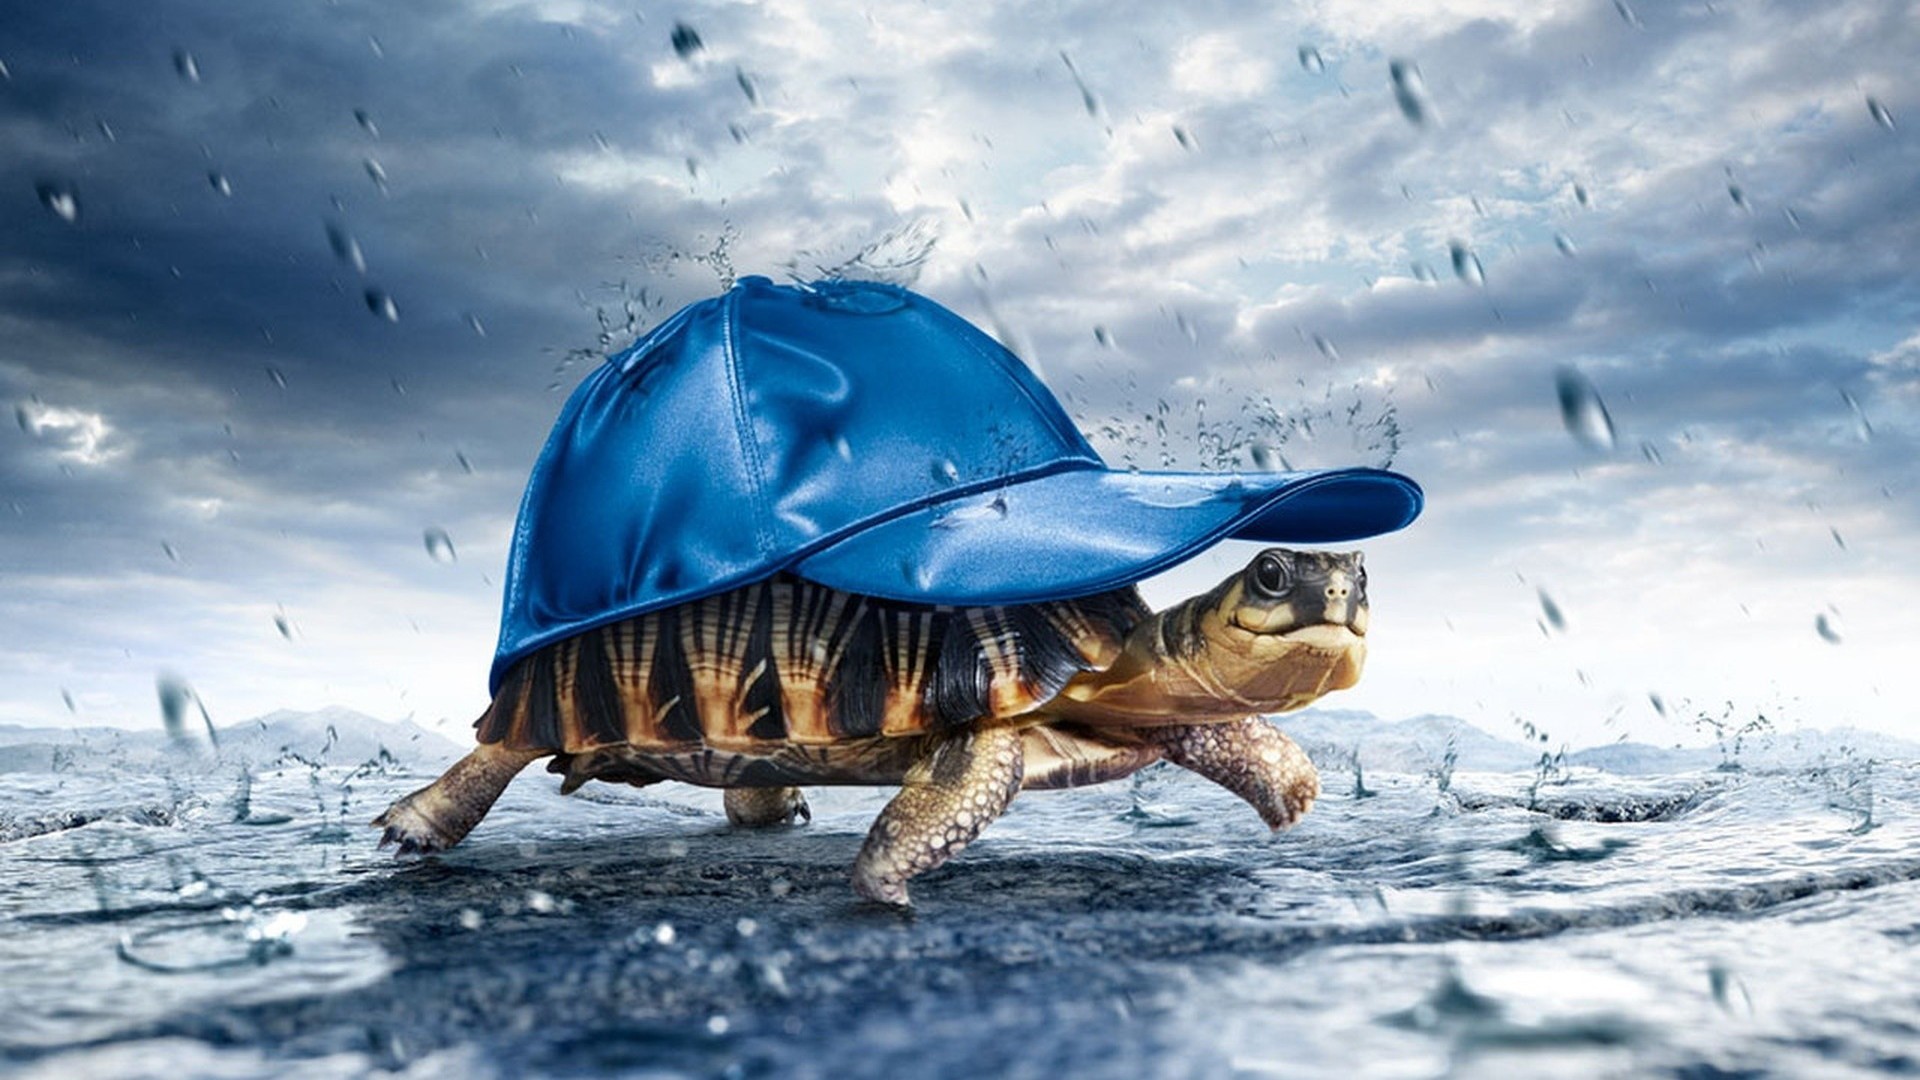 Background Rain Turtle Funny Wallpaper High Quality